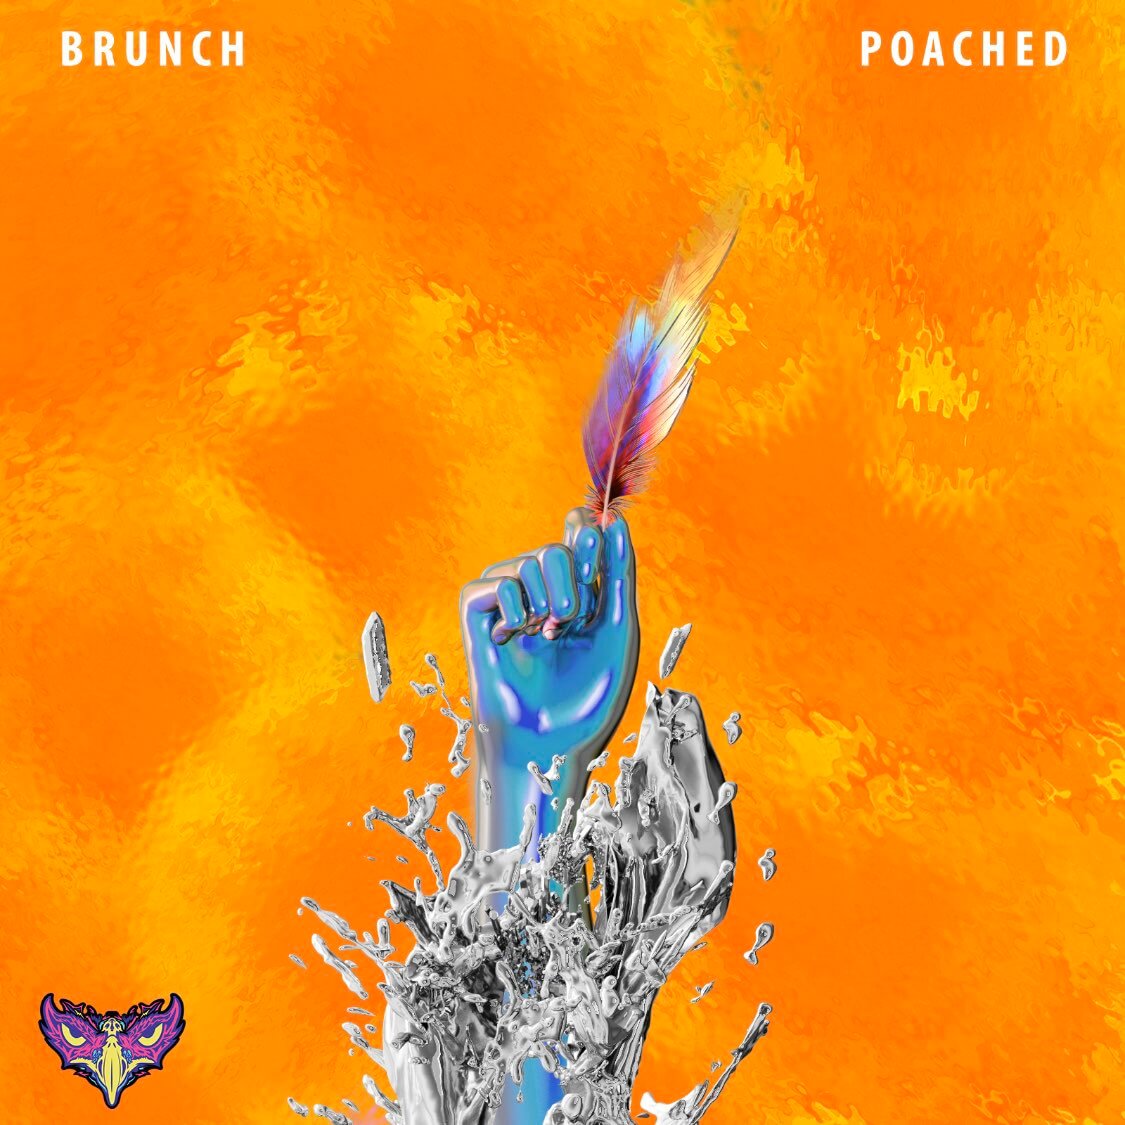 Brunch Whips Up a Meal in ‘Poached’